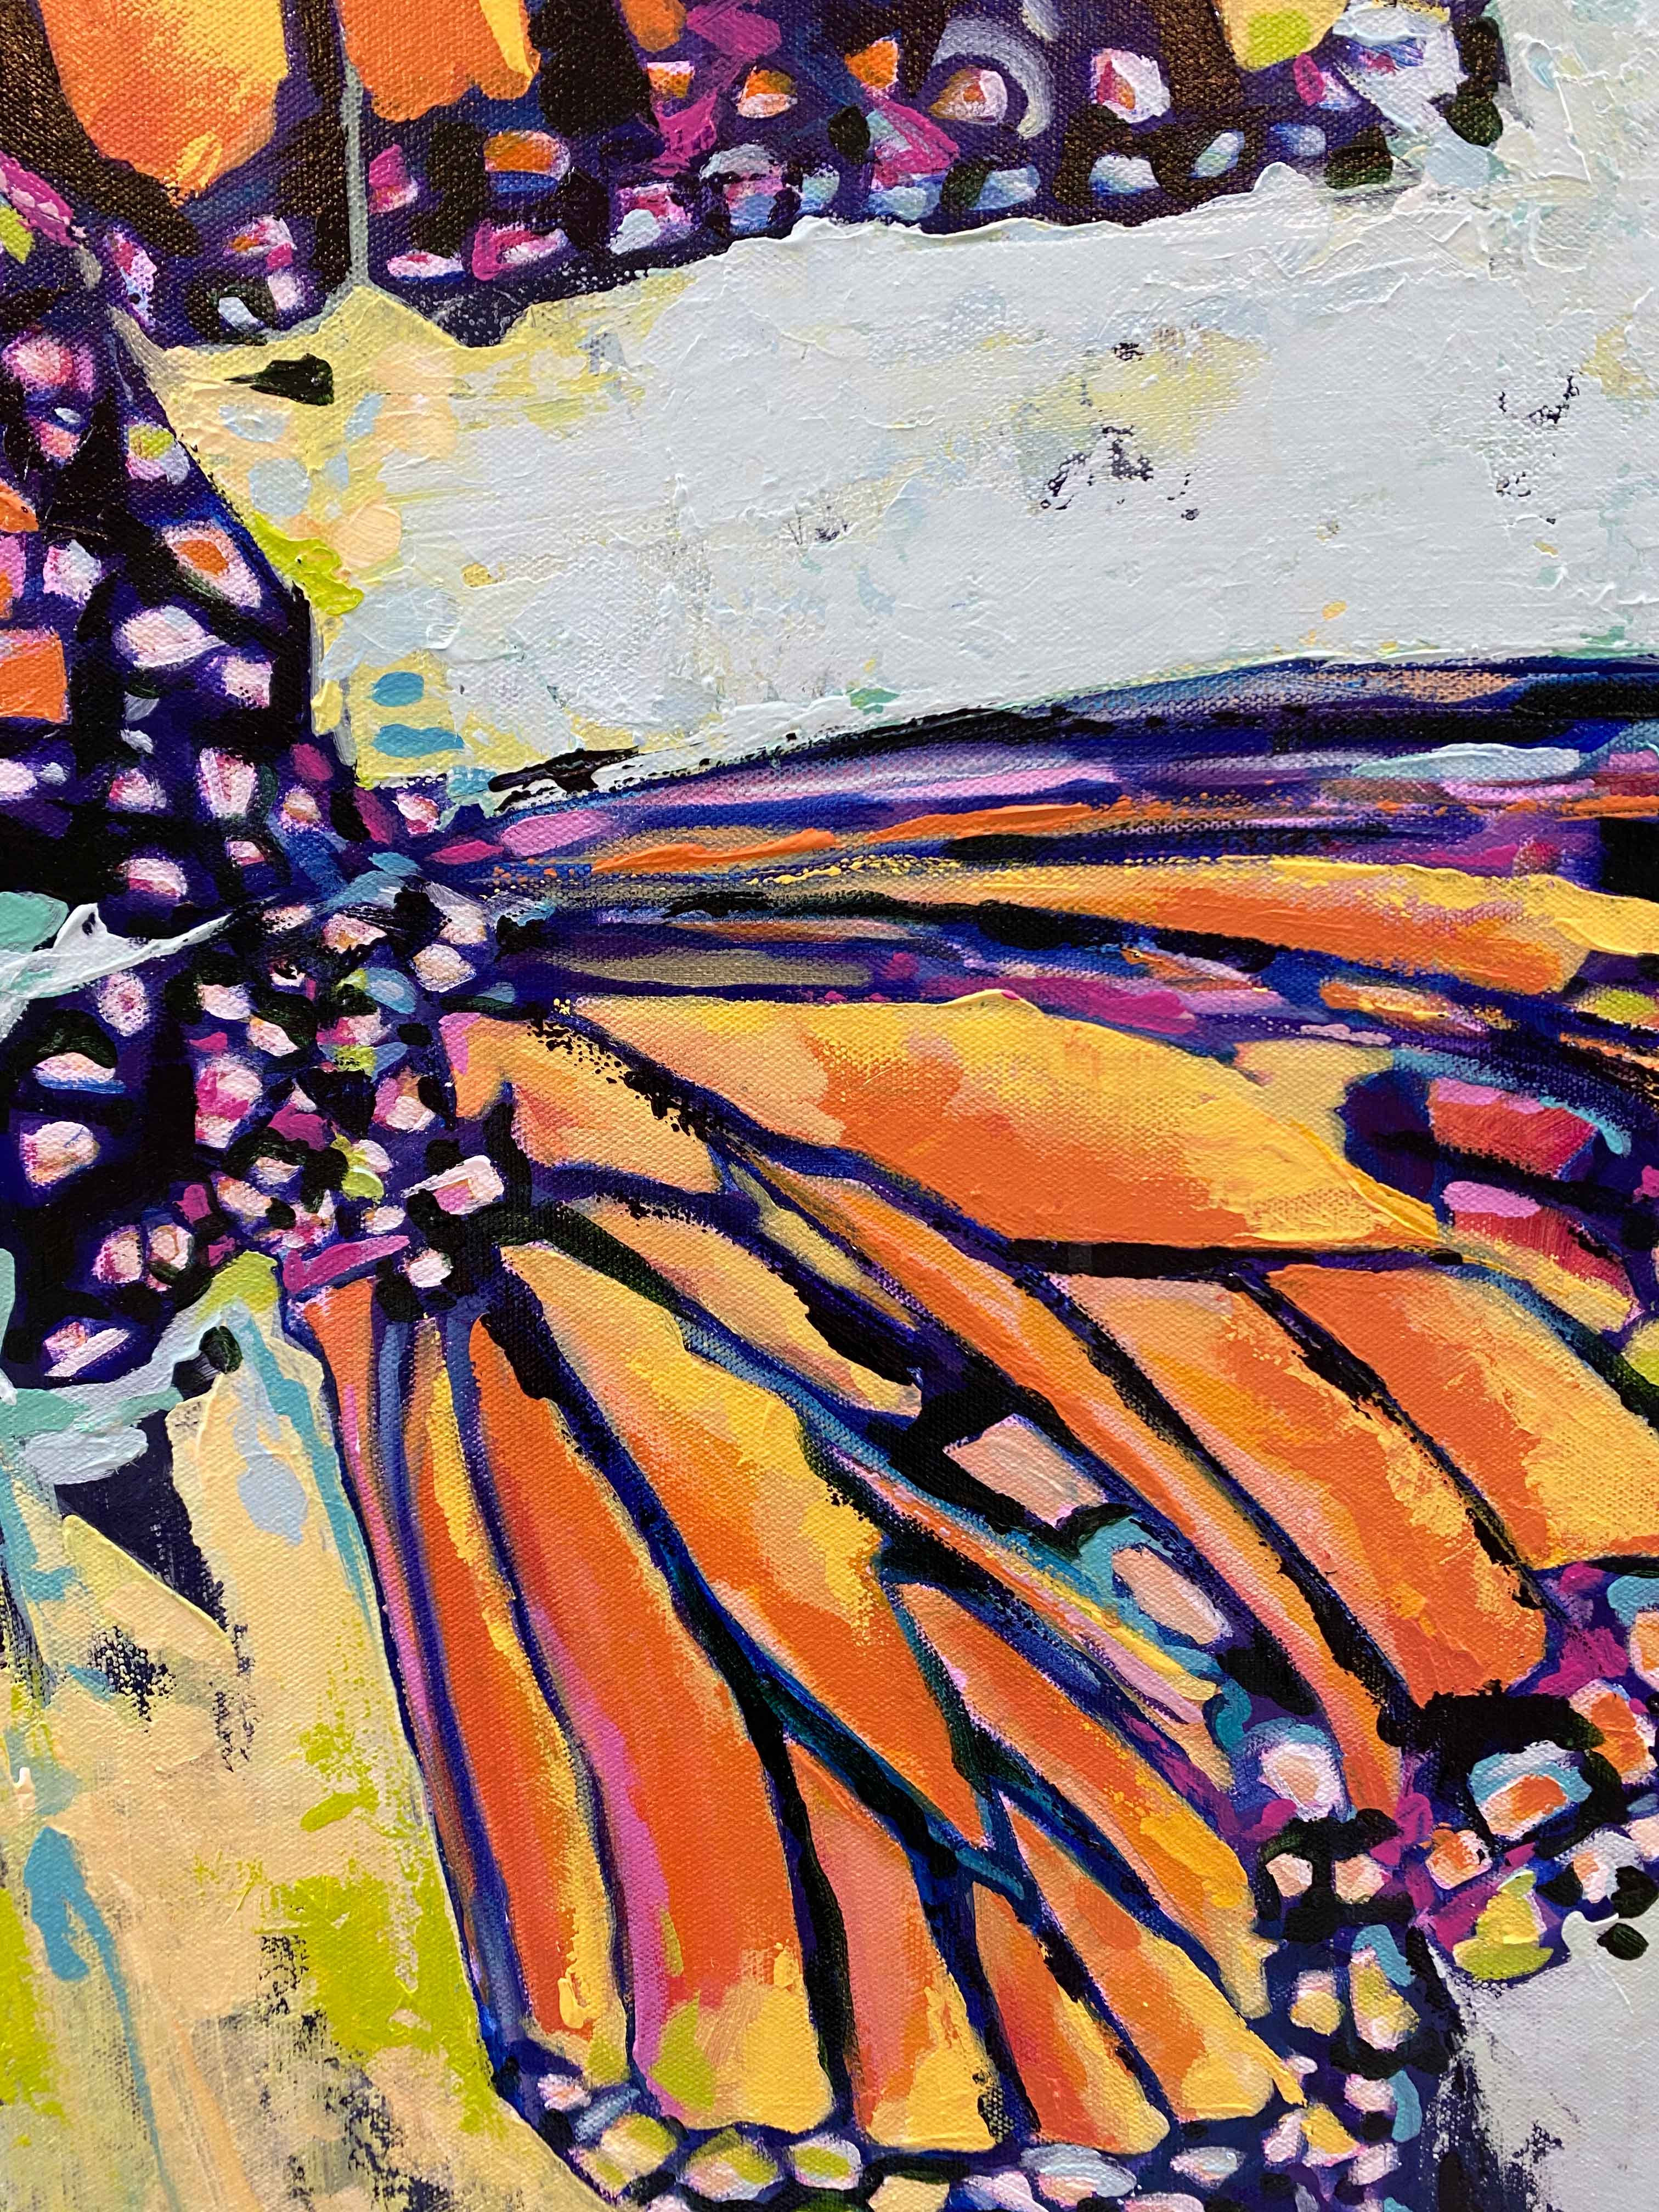 "Whispers Wishes and Butterfly Kisses" 36x36" Original on Canvas